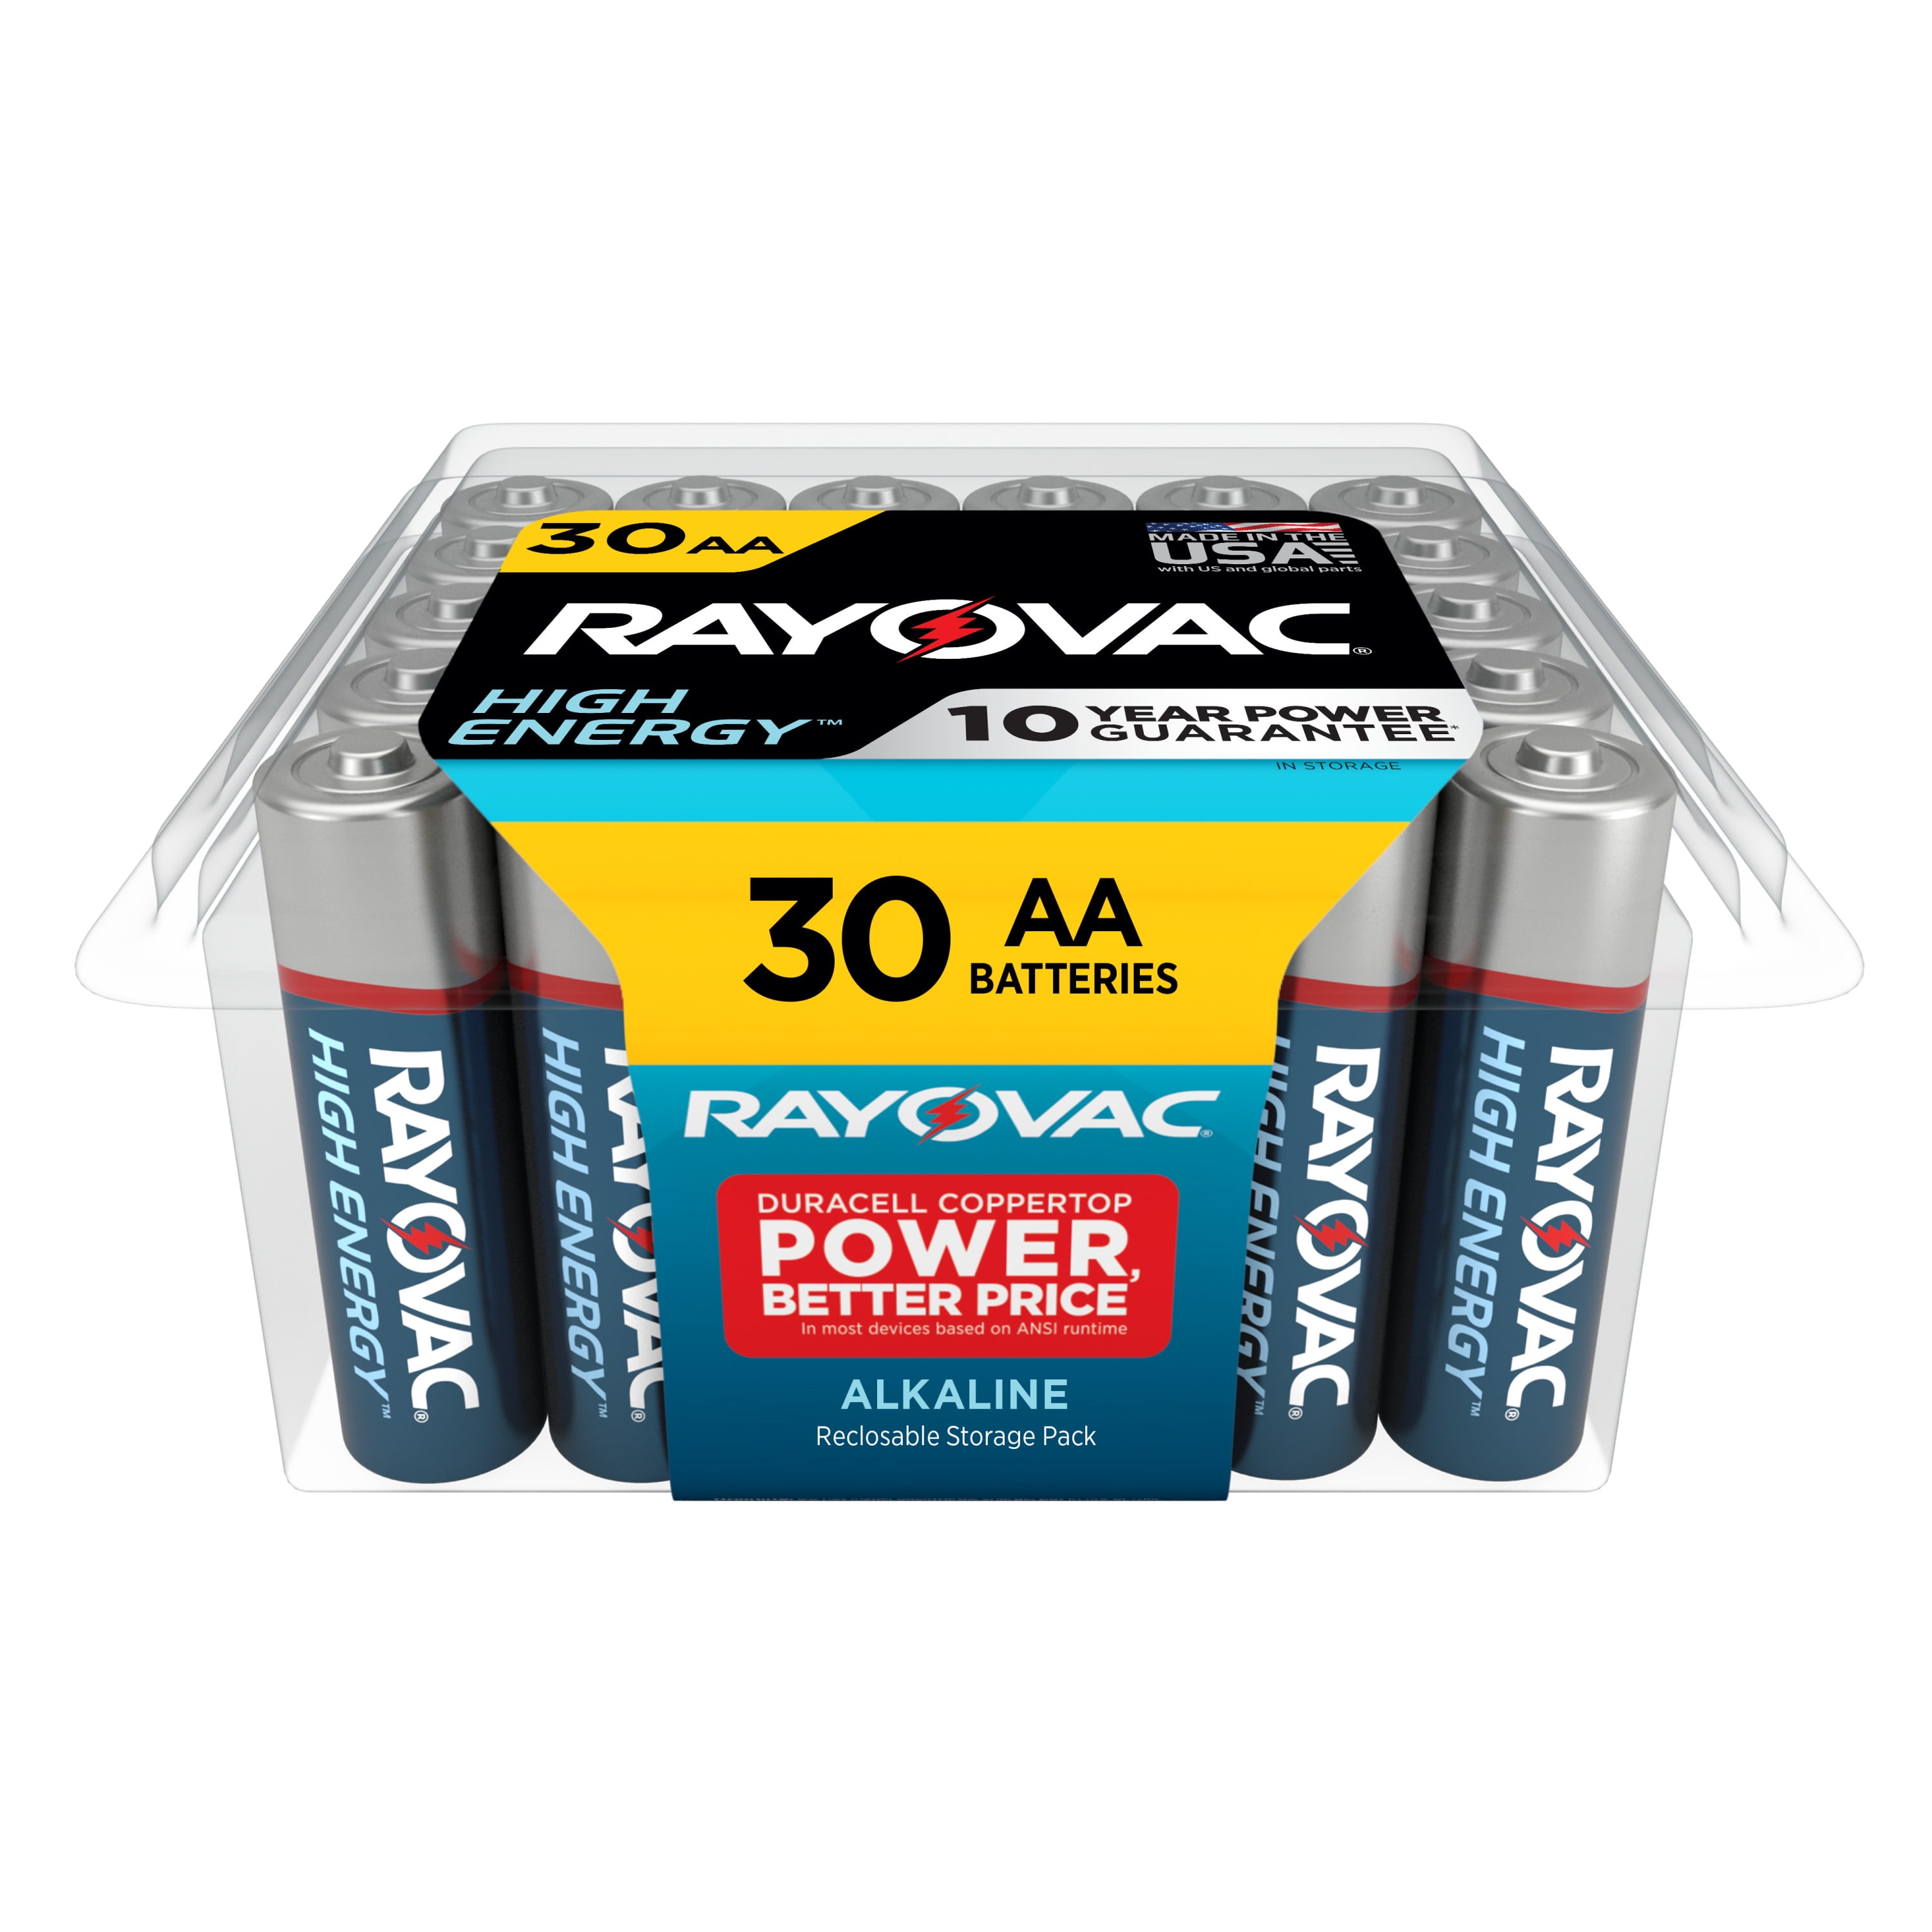 Rayovac High Energy AA Batteries (30 Pack), Double A Batteries